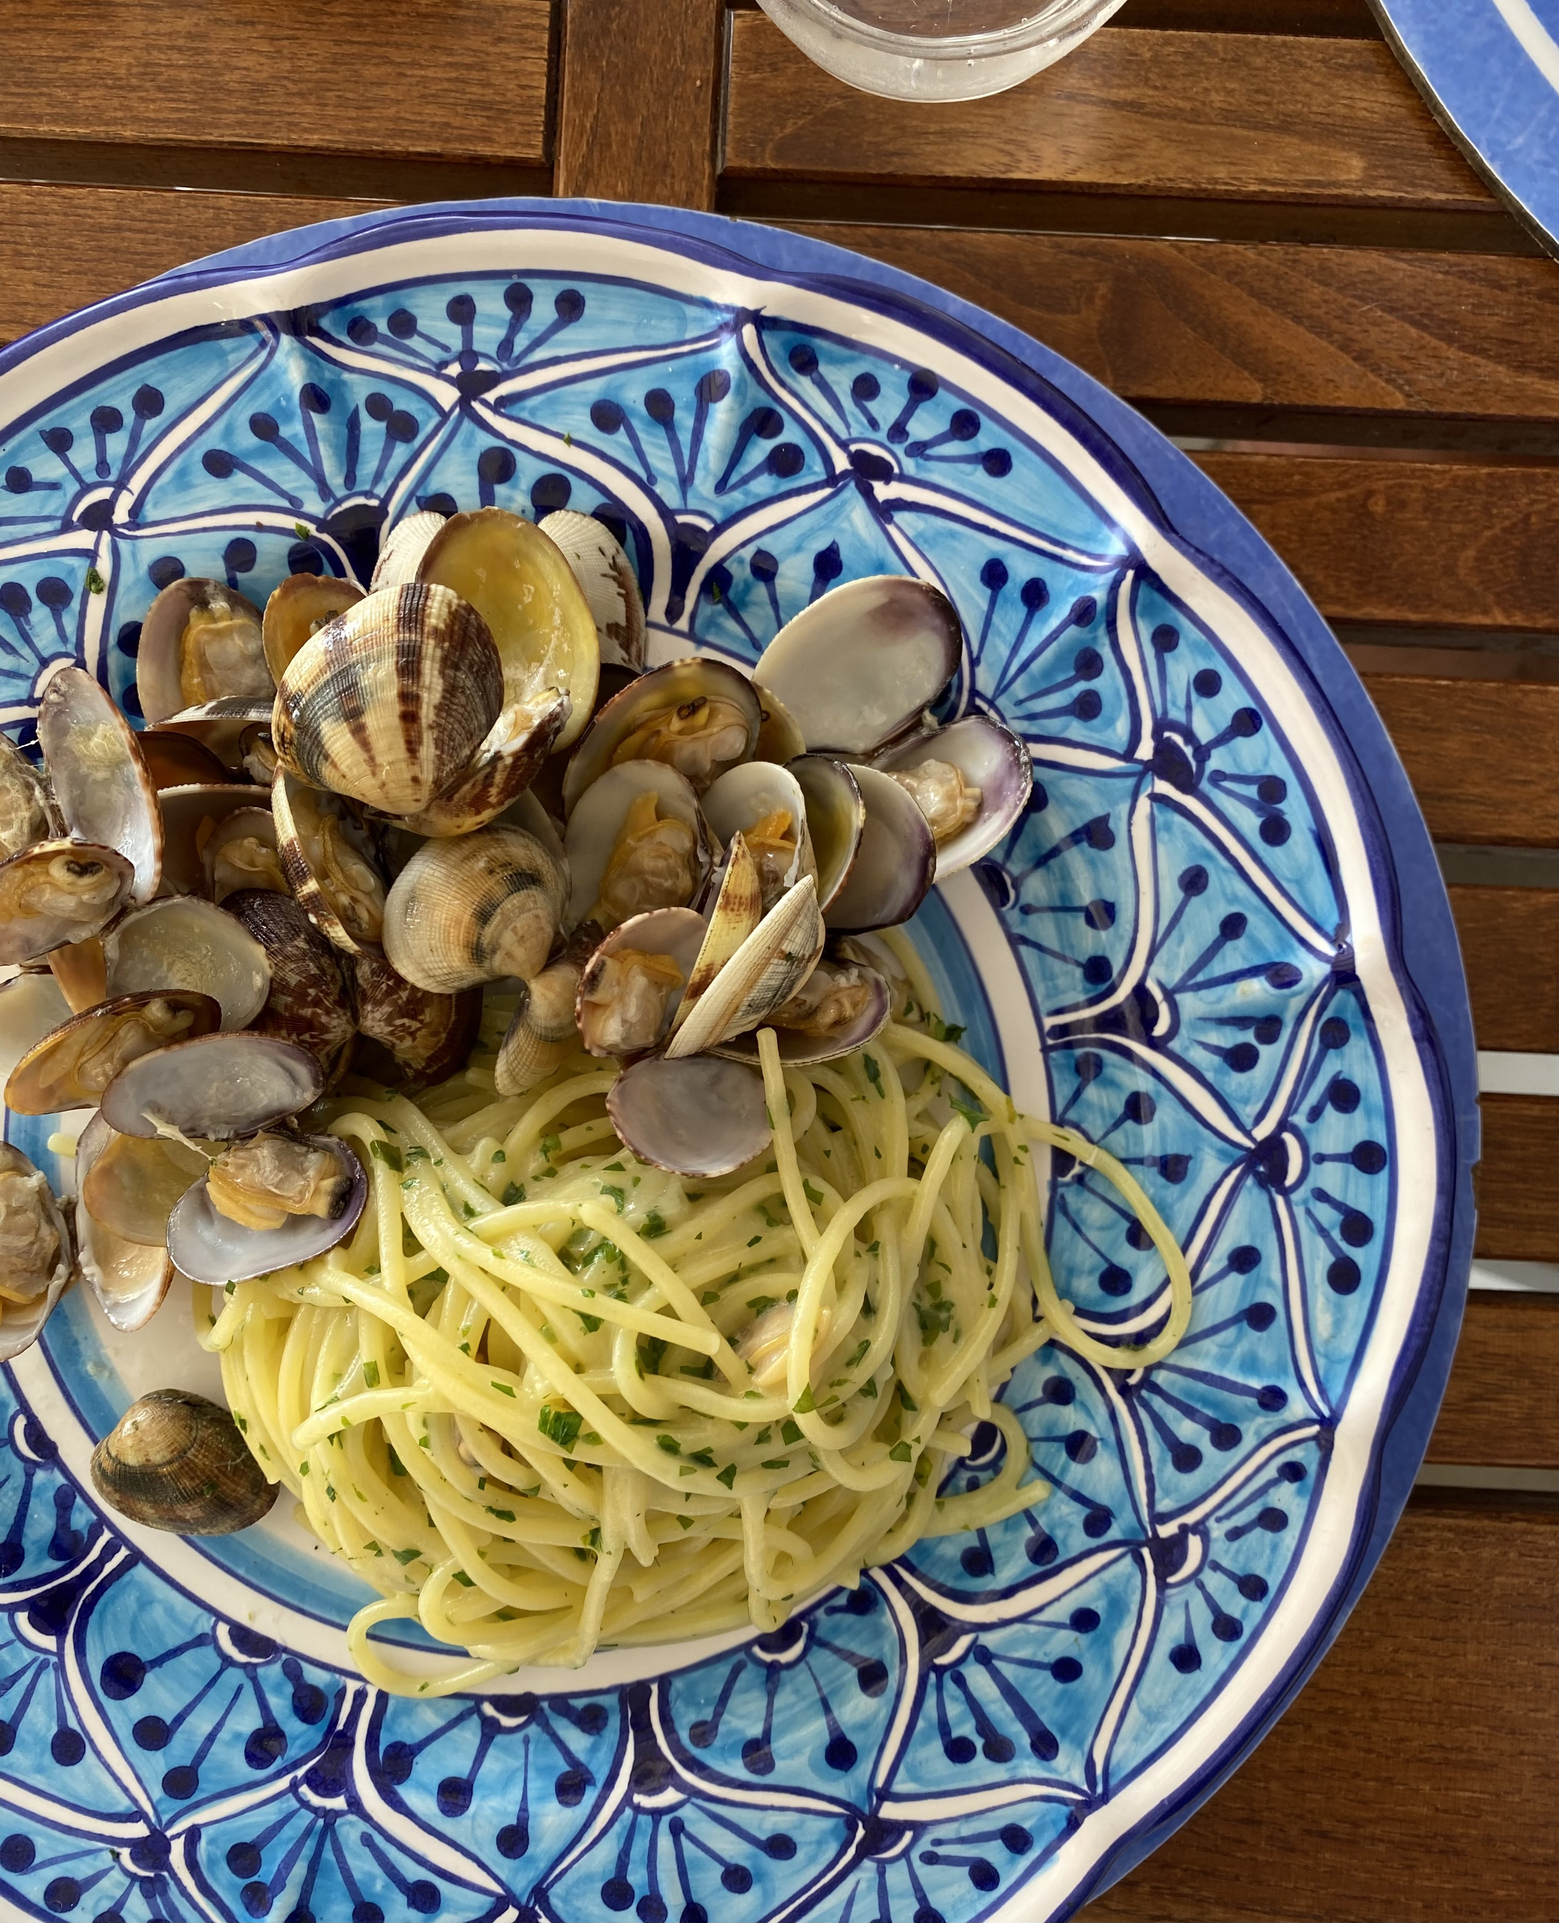 A plate of spaghetti with clams on a patterned plate, set on a wooden table